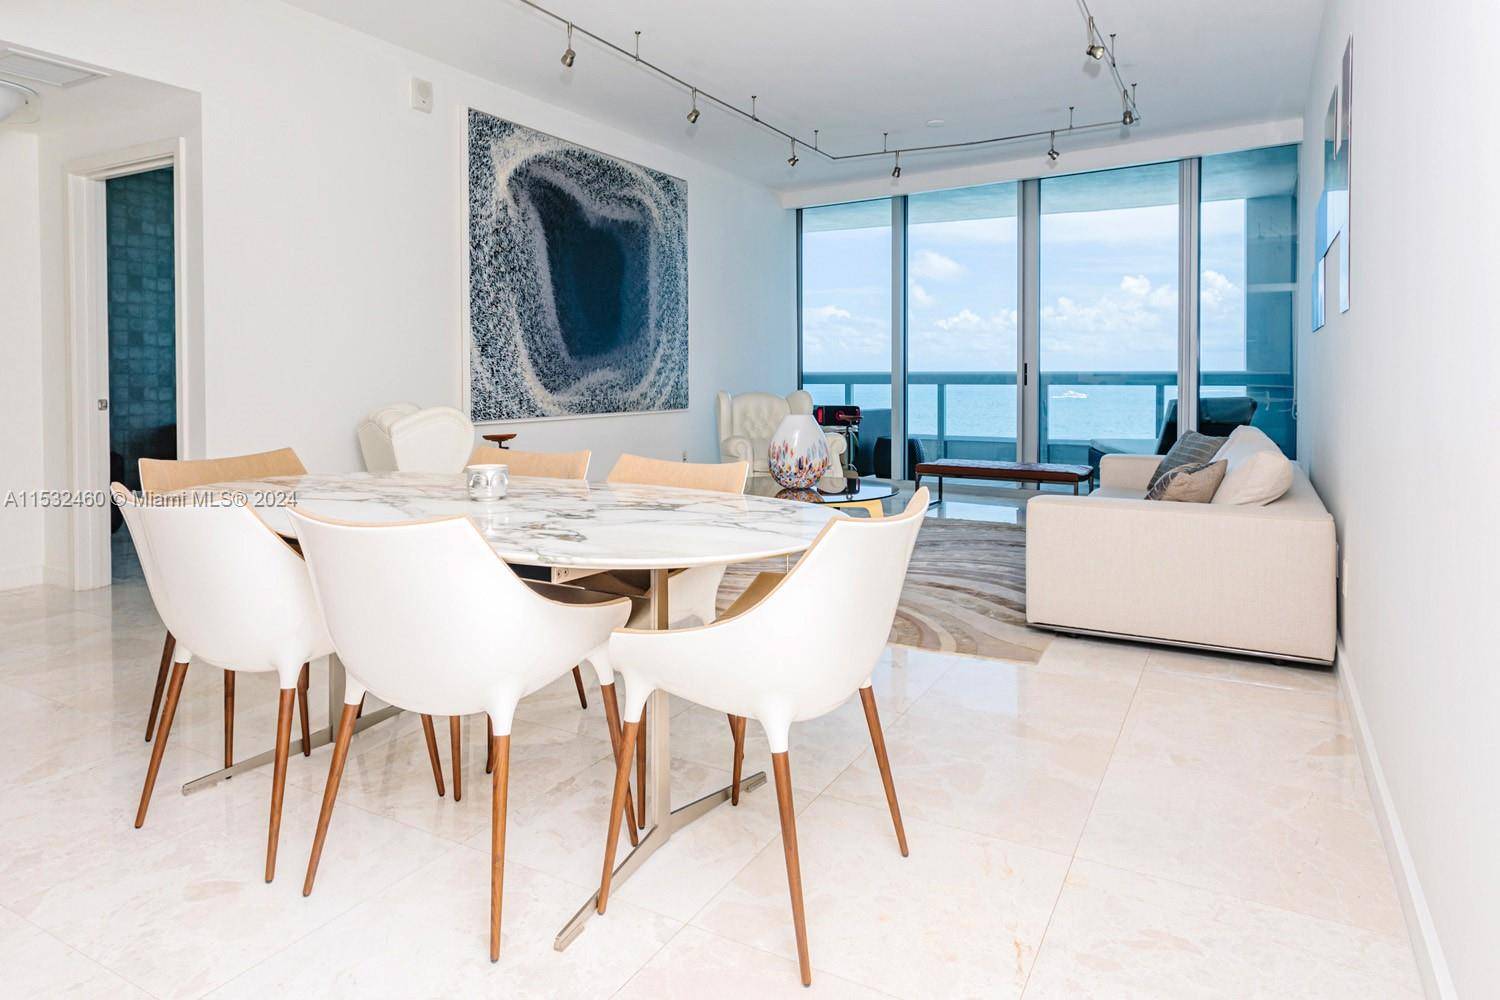 Experience breathtaking ocean panoramas from every angle in this exquisite 3BR 3Bath abode, graced with stylish furnishings and dual expansive balconies.